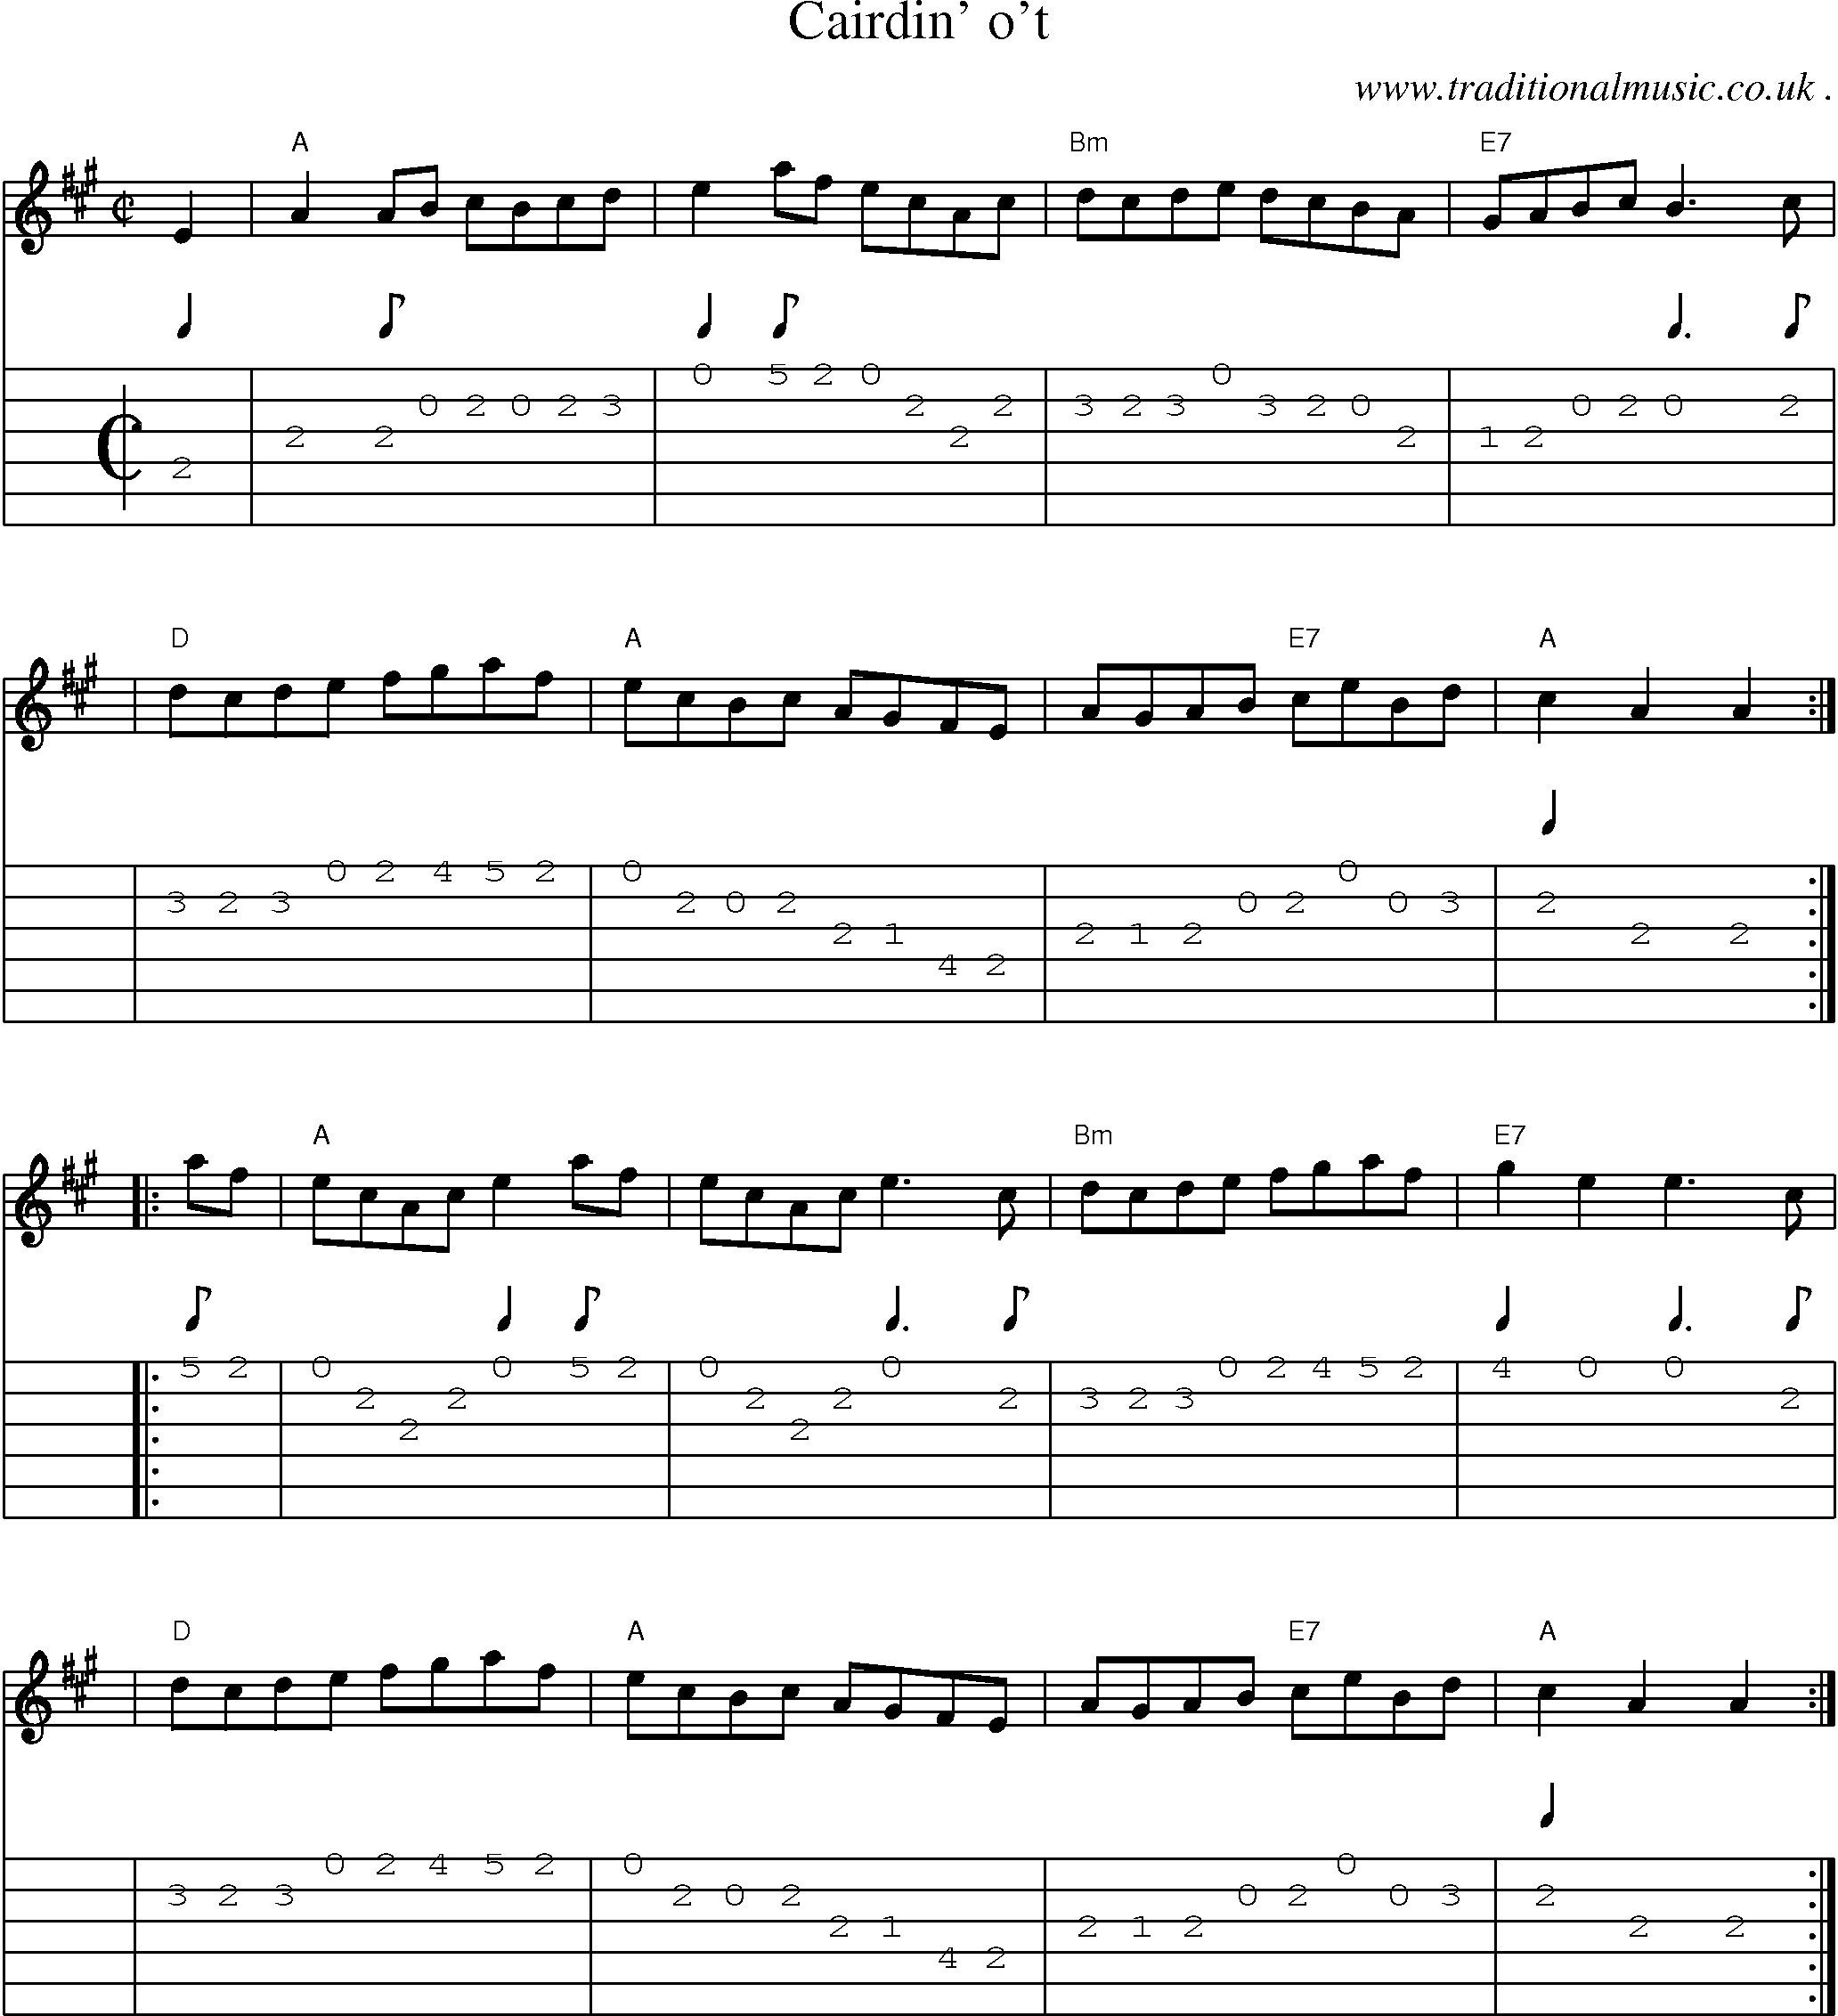 Sheet-music  score, Chords and Guitar Tabs for Cairdin Ot